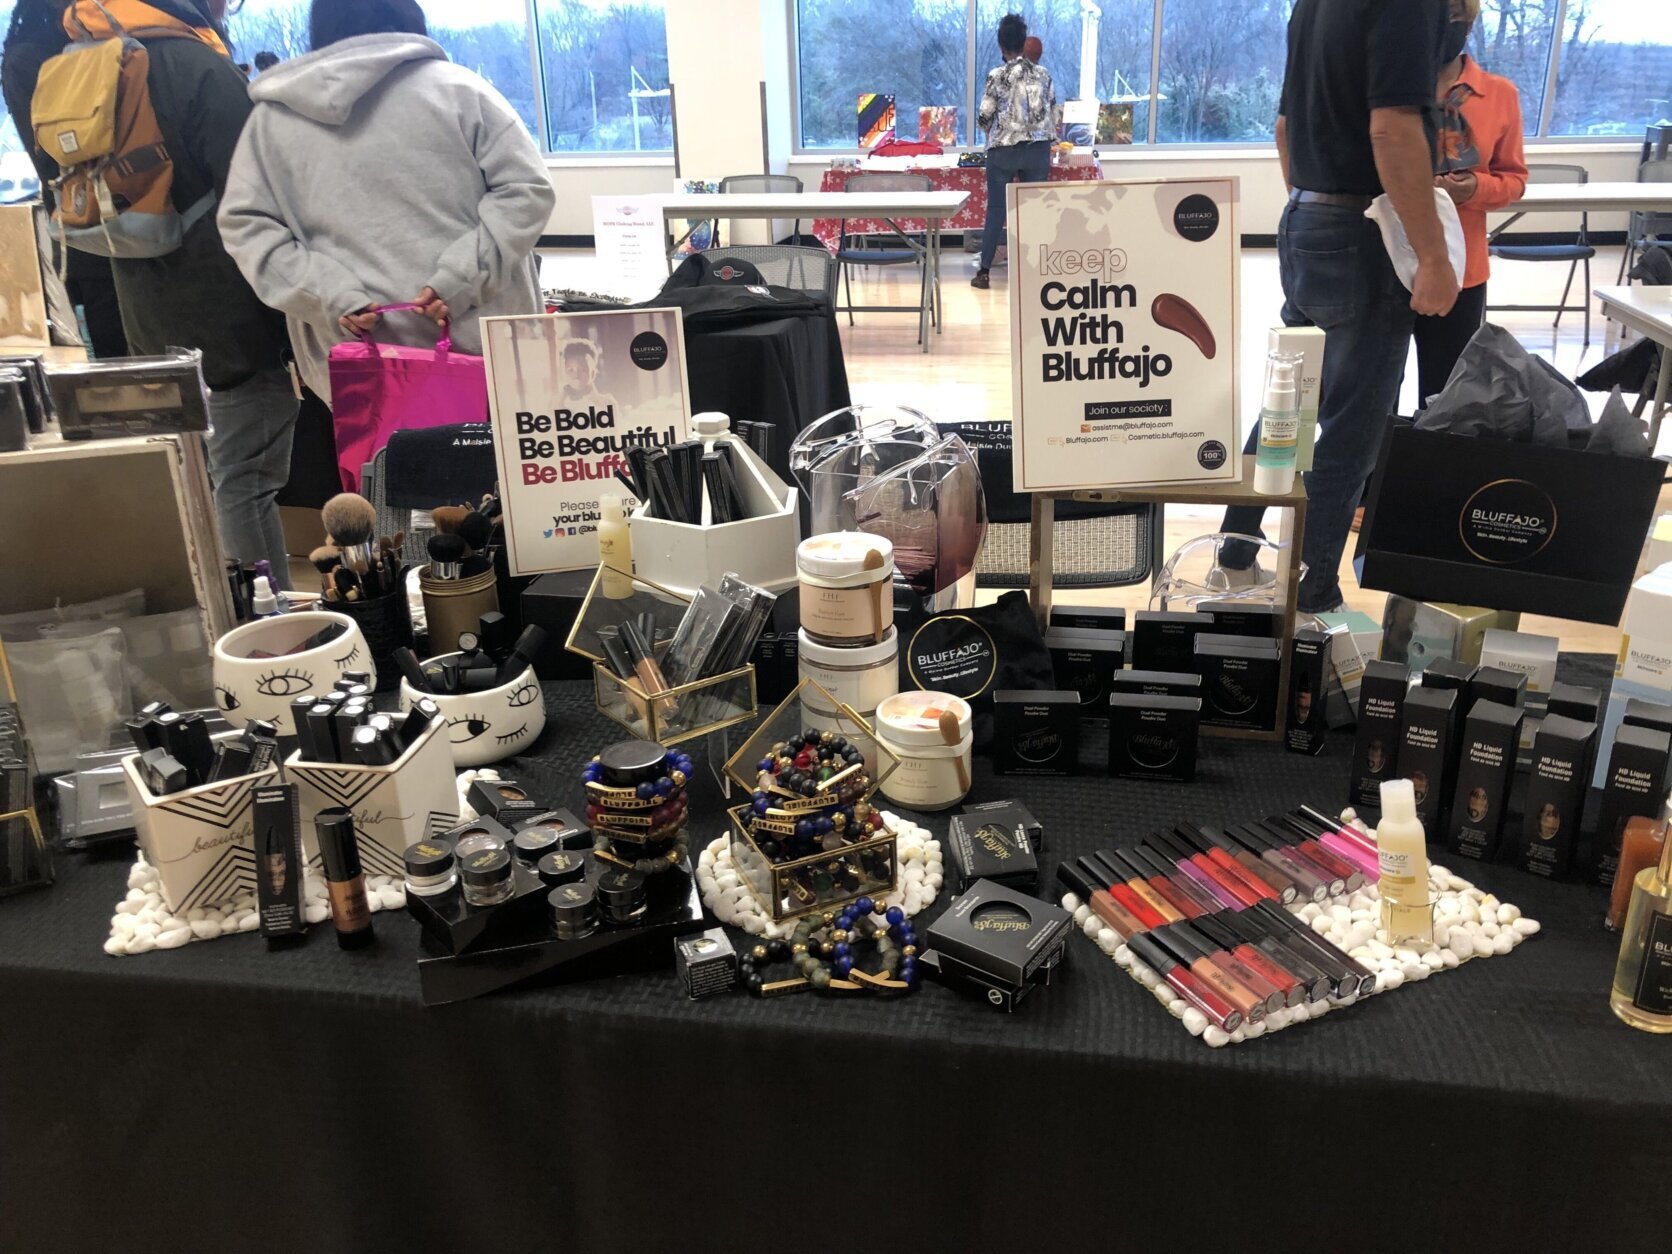 Bluffajo Cosmetics was one of many small businesses featured on Saturday.